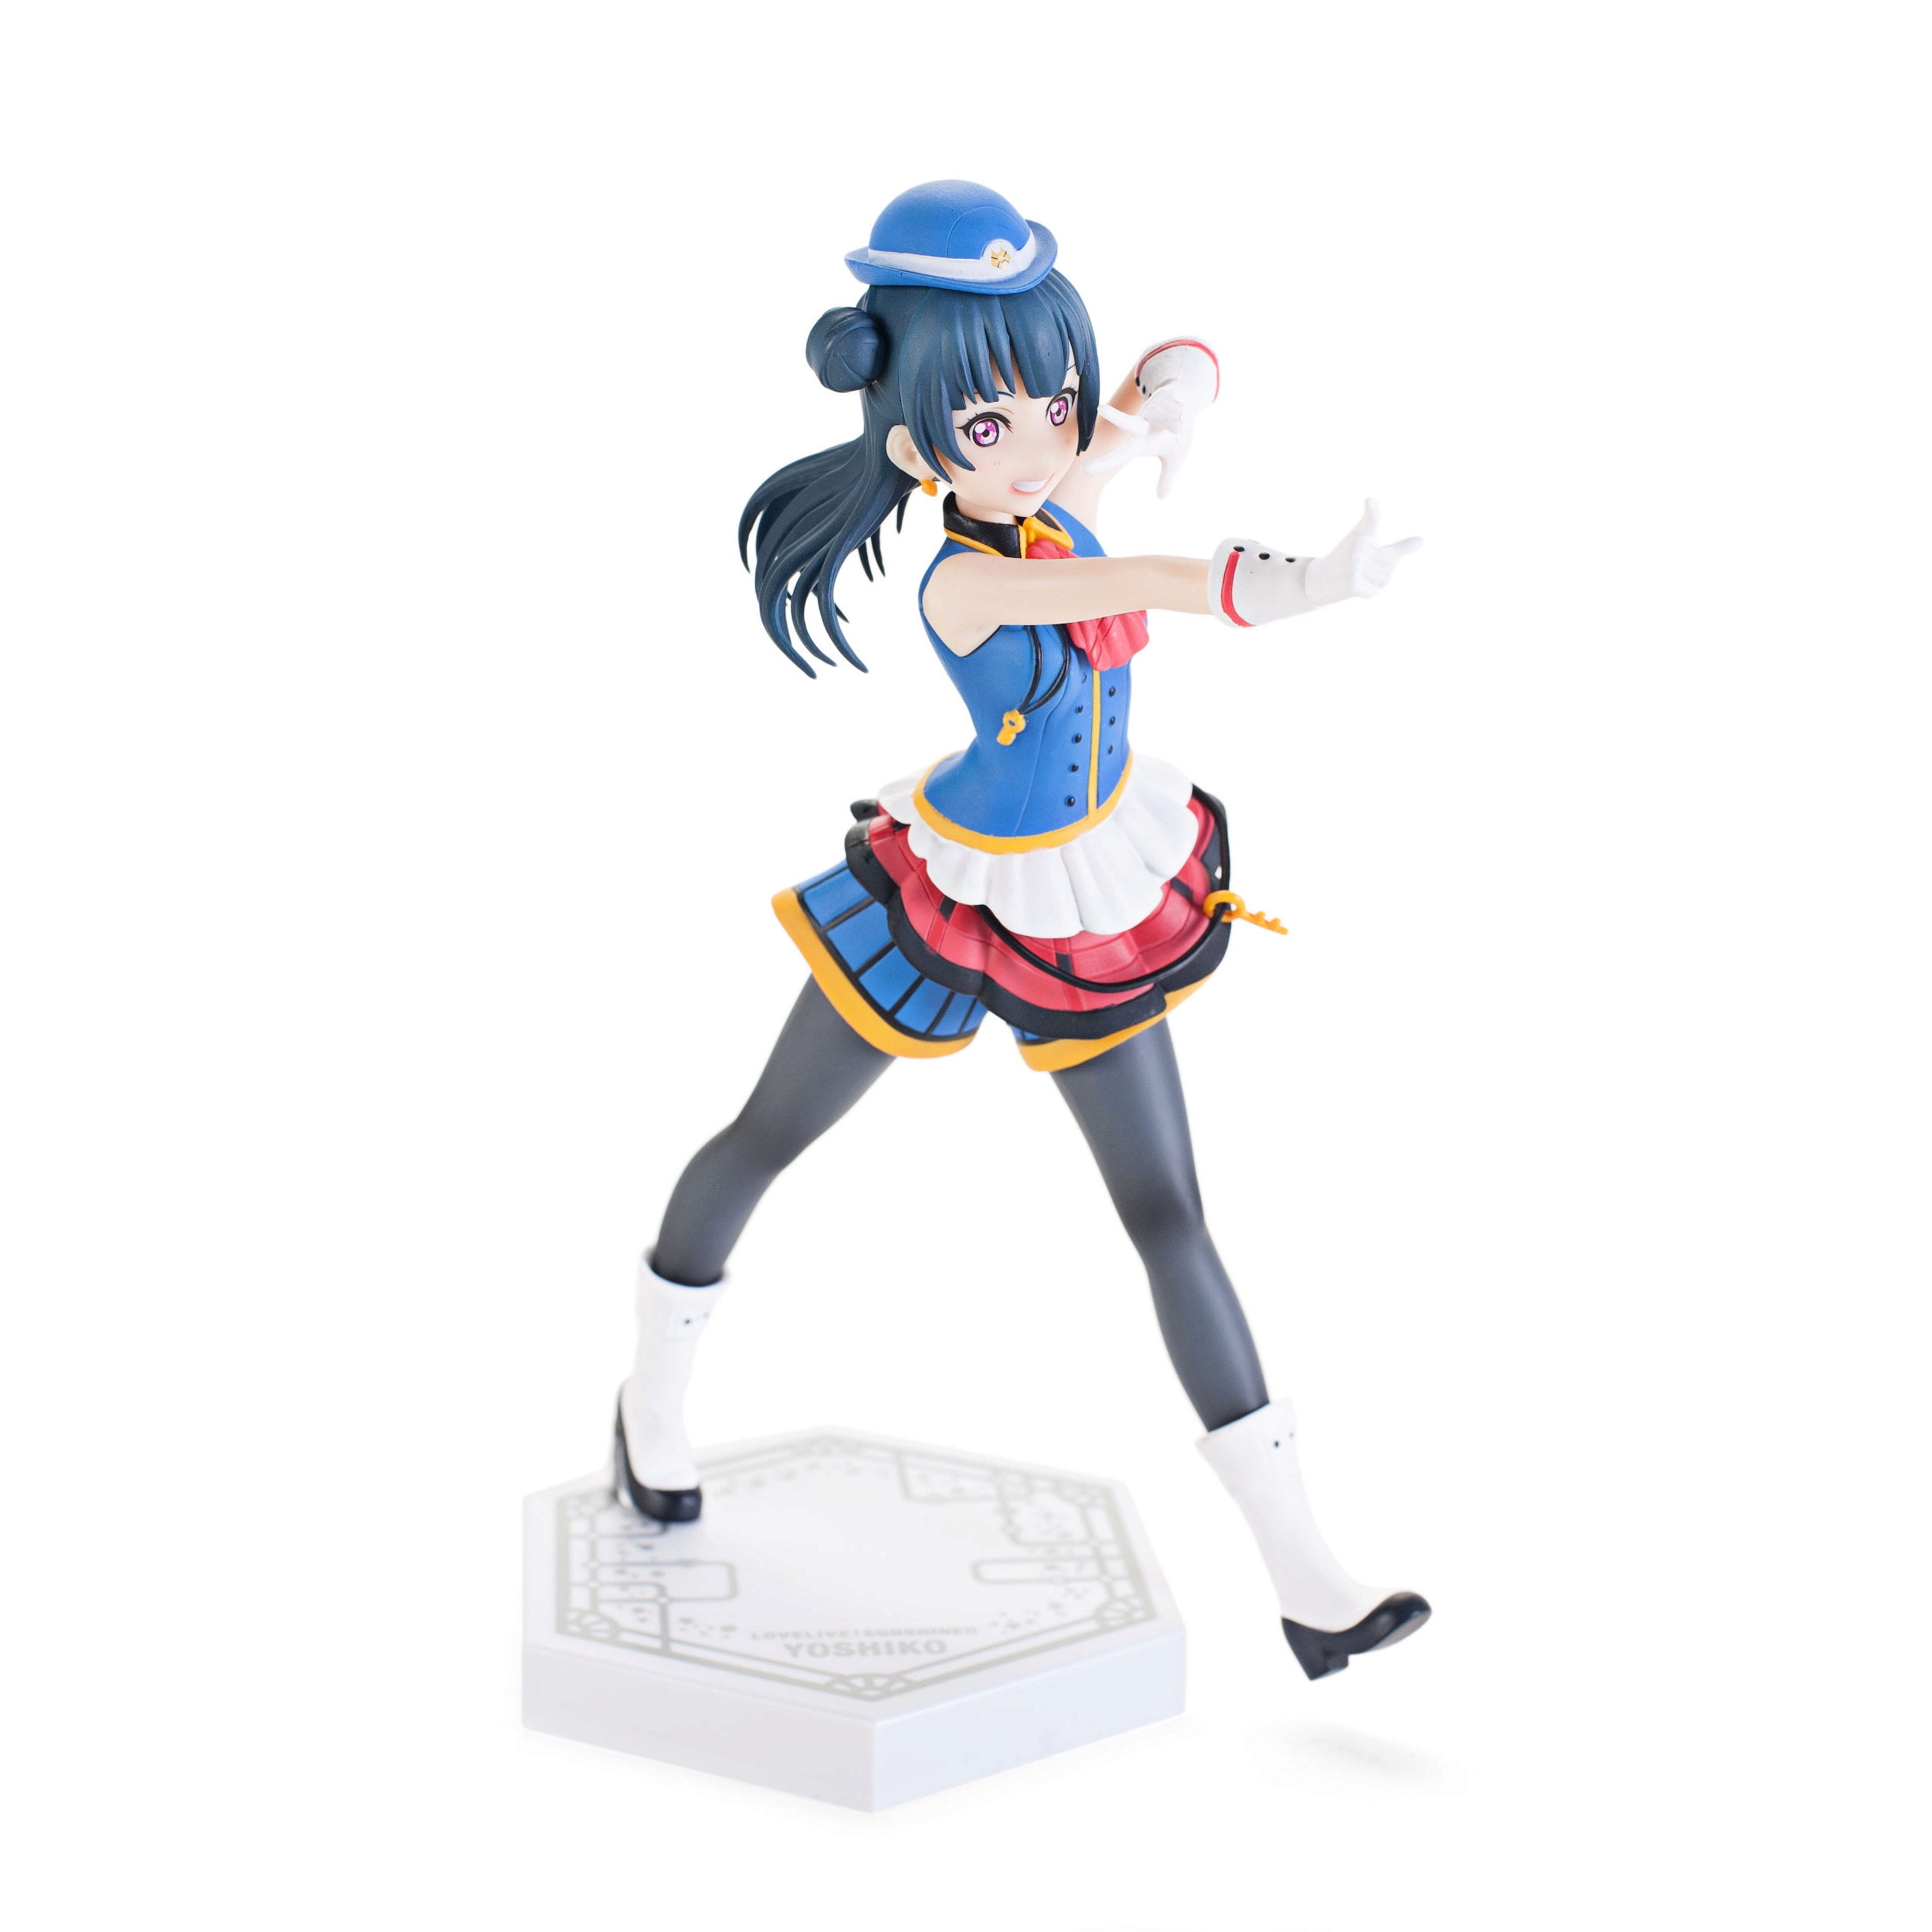 Japanese, Anime Collectibles & Art Collectibles SSS Figure Happy Party ...